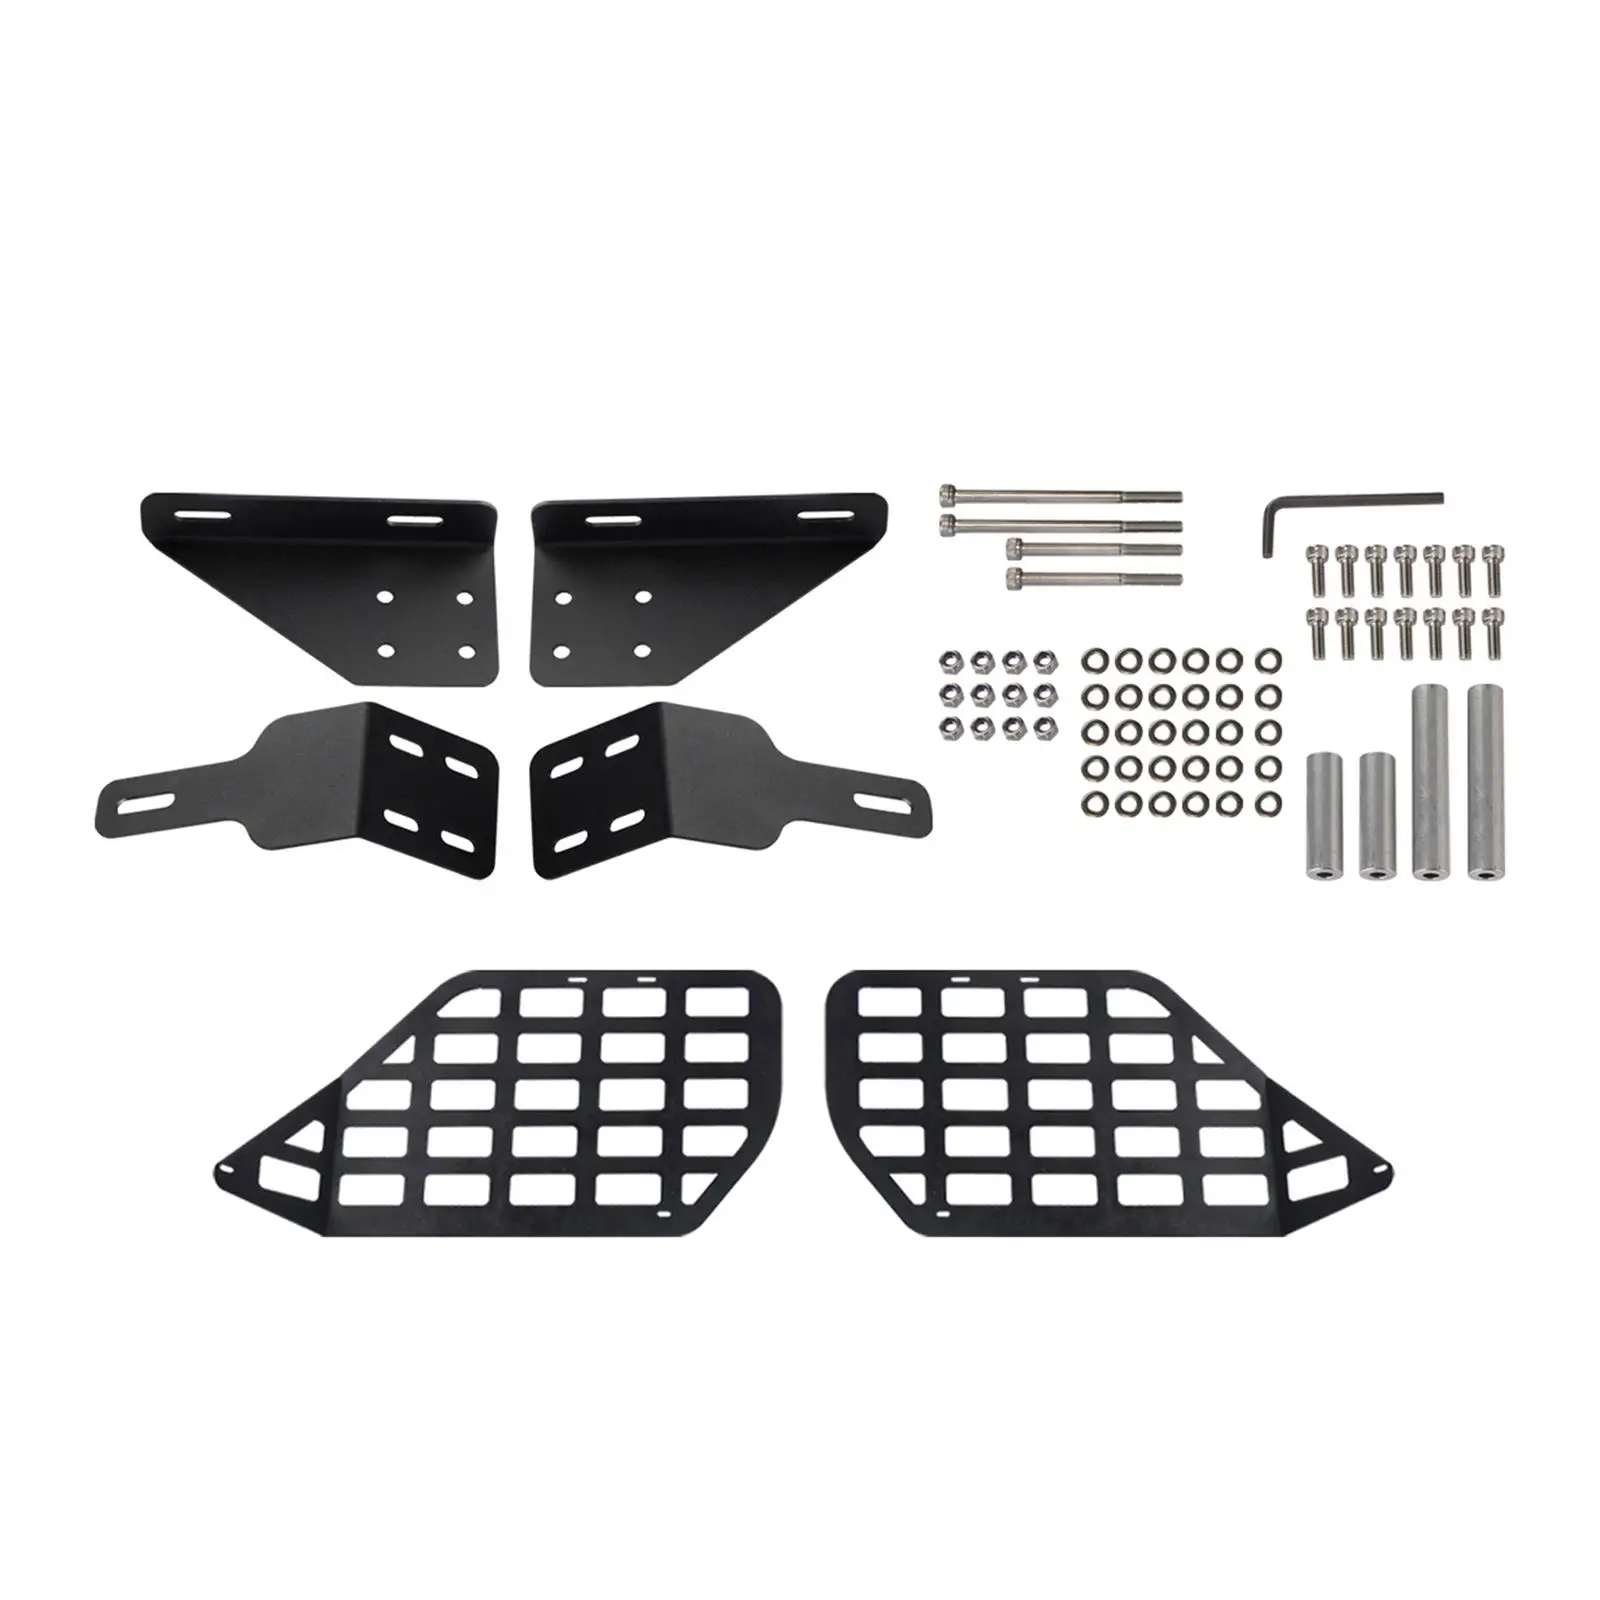 Modular Storage Panel System Rear Cargo Rack Replacement for Toyota for 4Runner